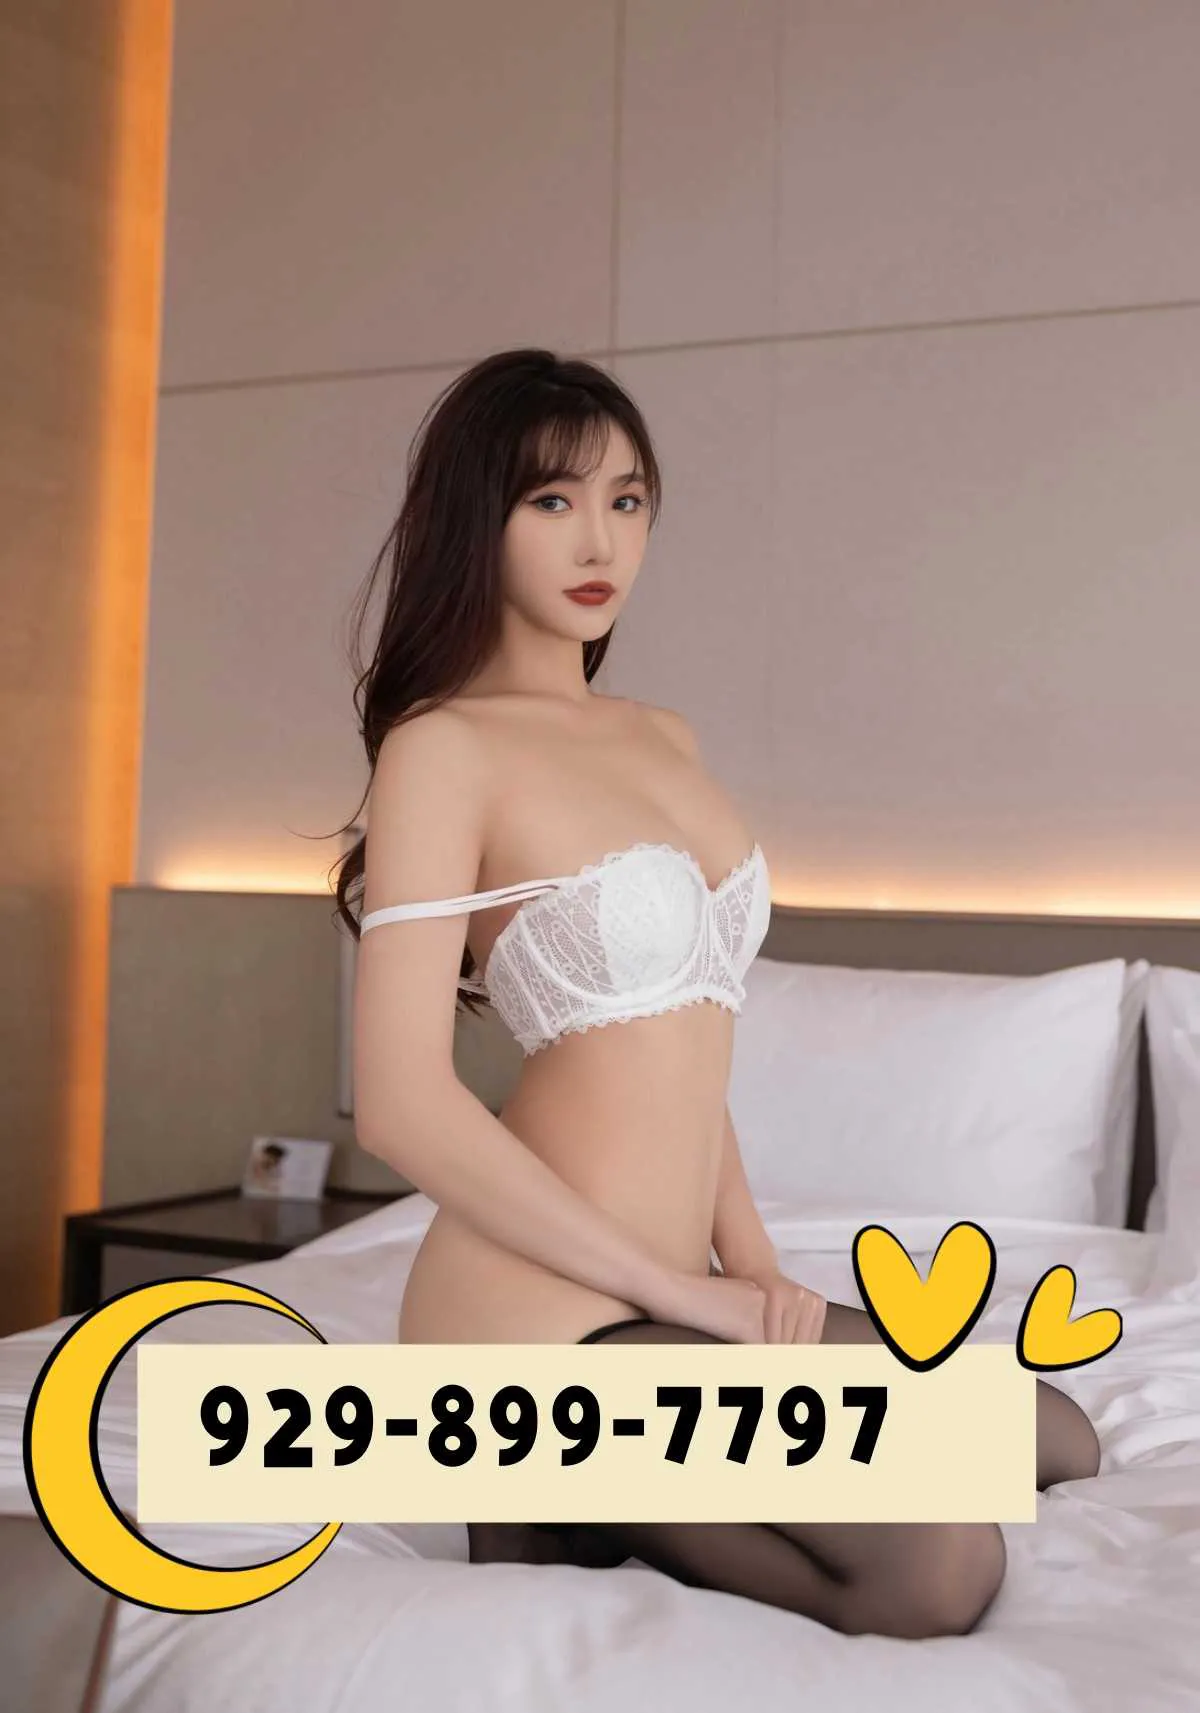 Reviews about escort with phone number 9298997797